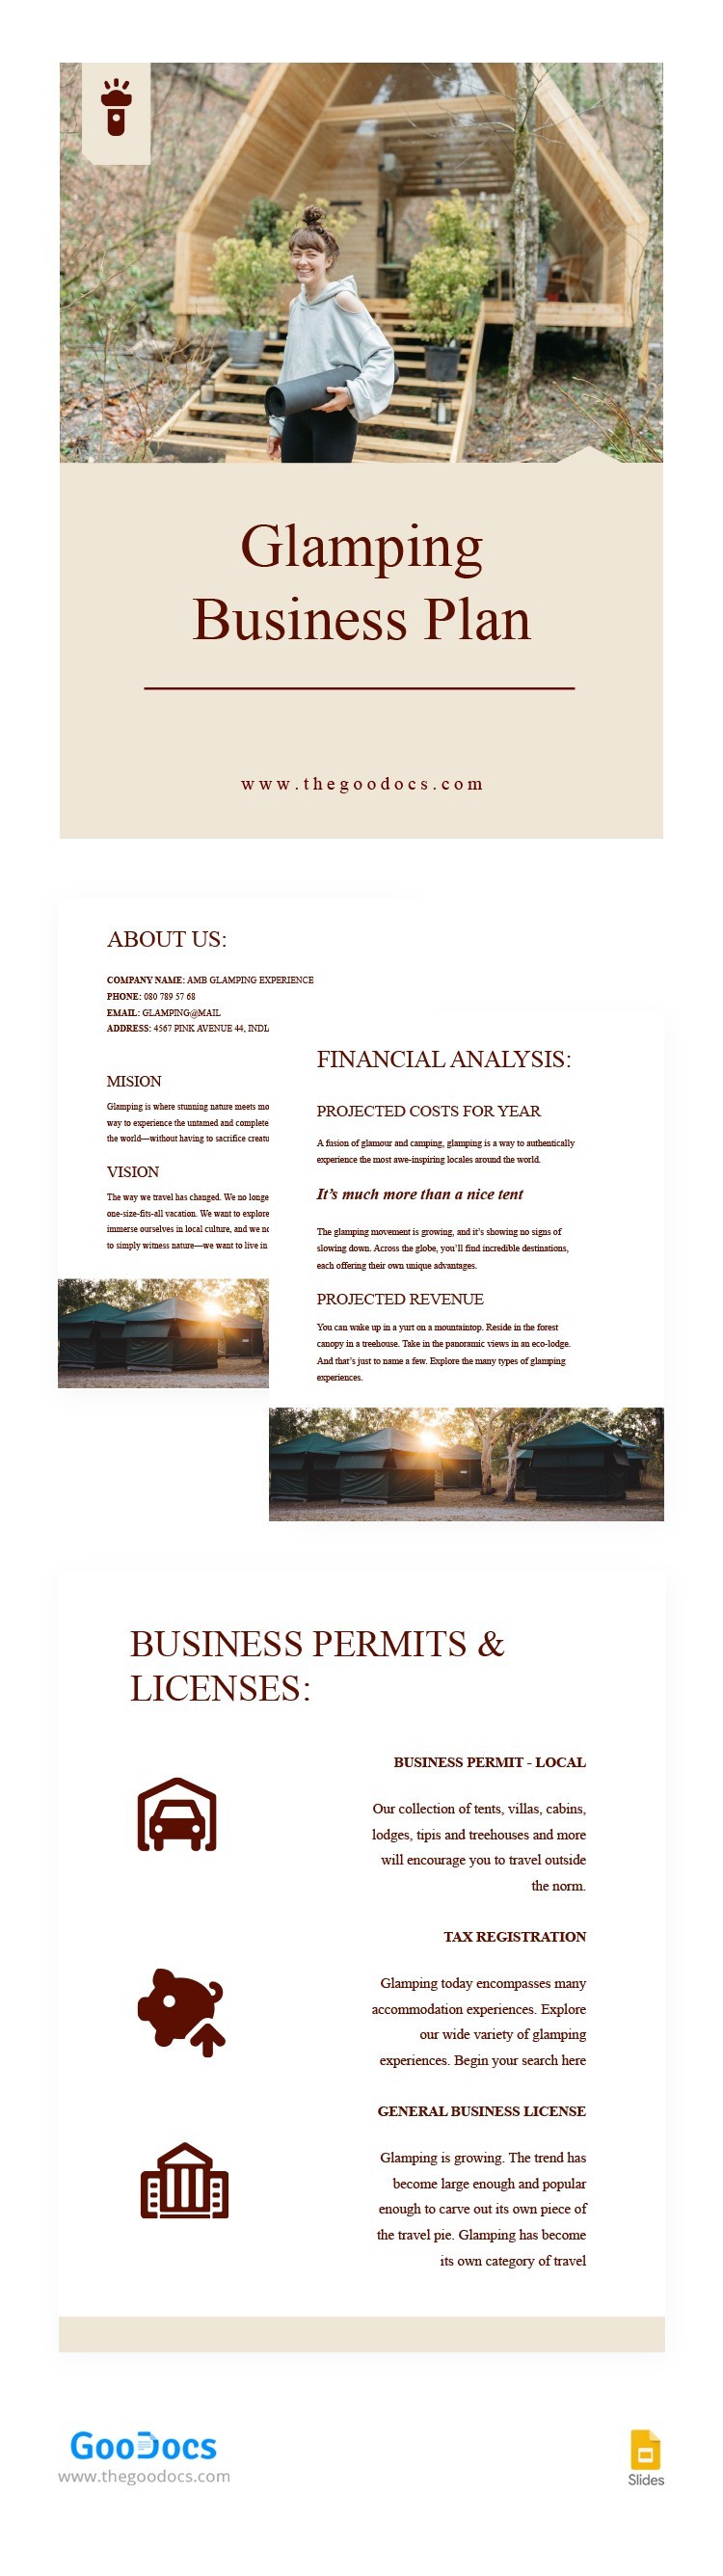 Glamping Business Plan Template In Google Slides